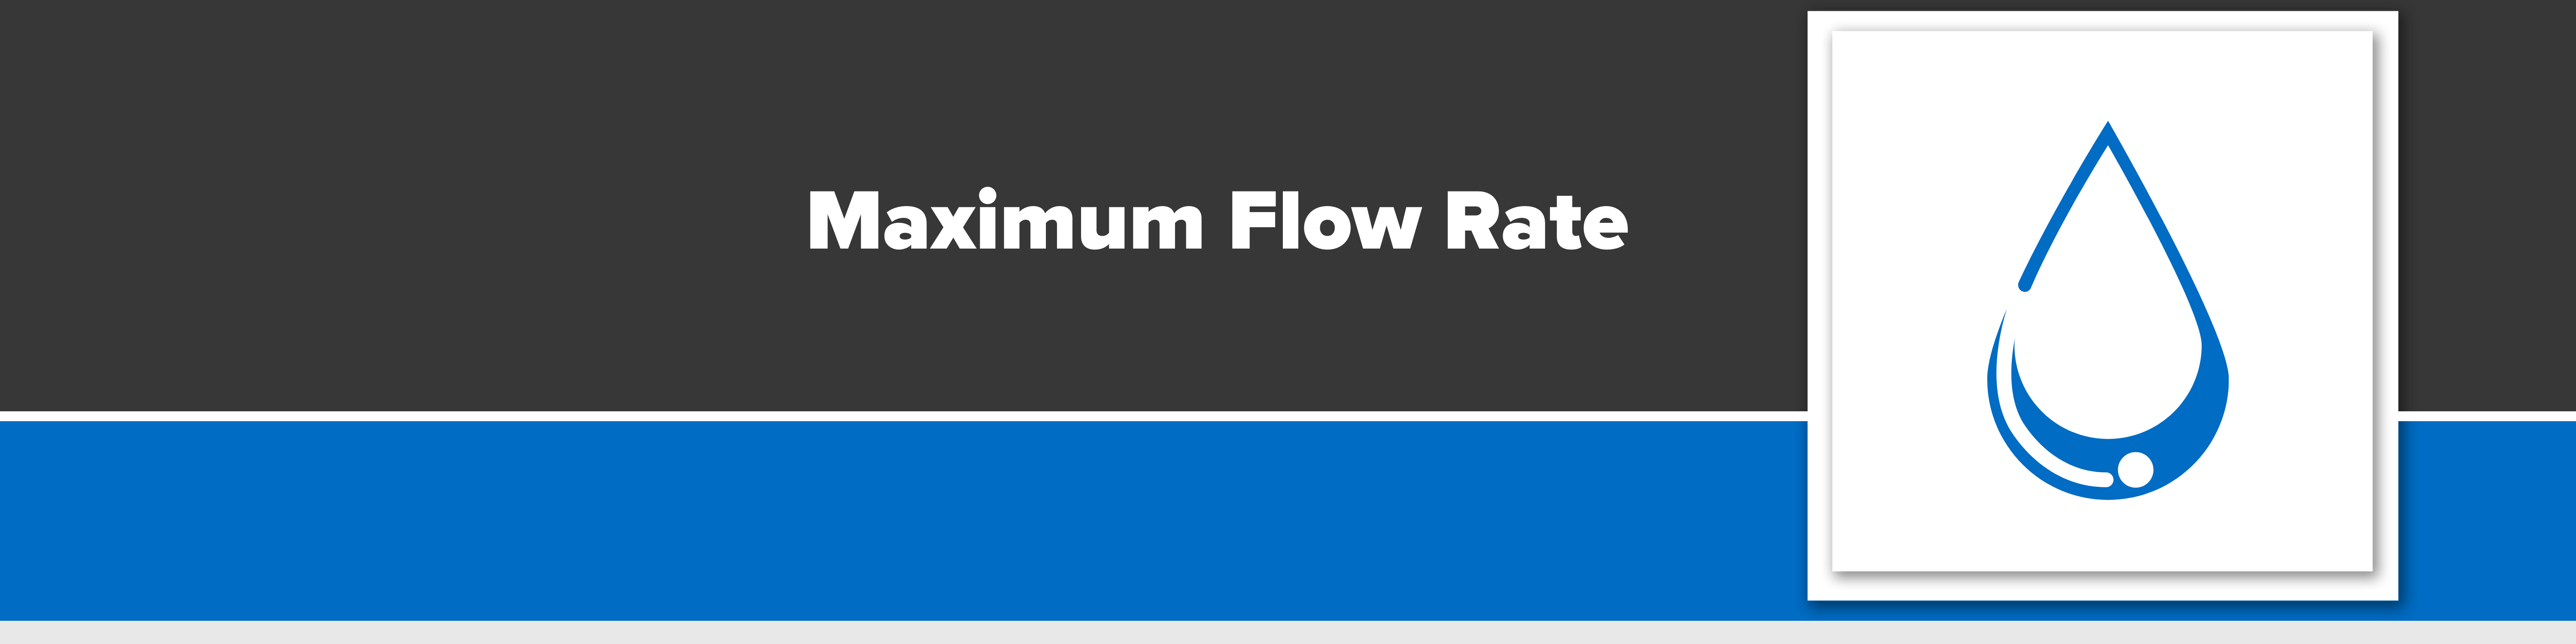 Header image with text "Maximum Flow Rate"